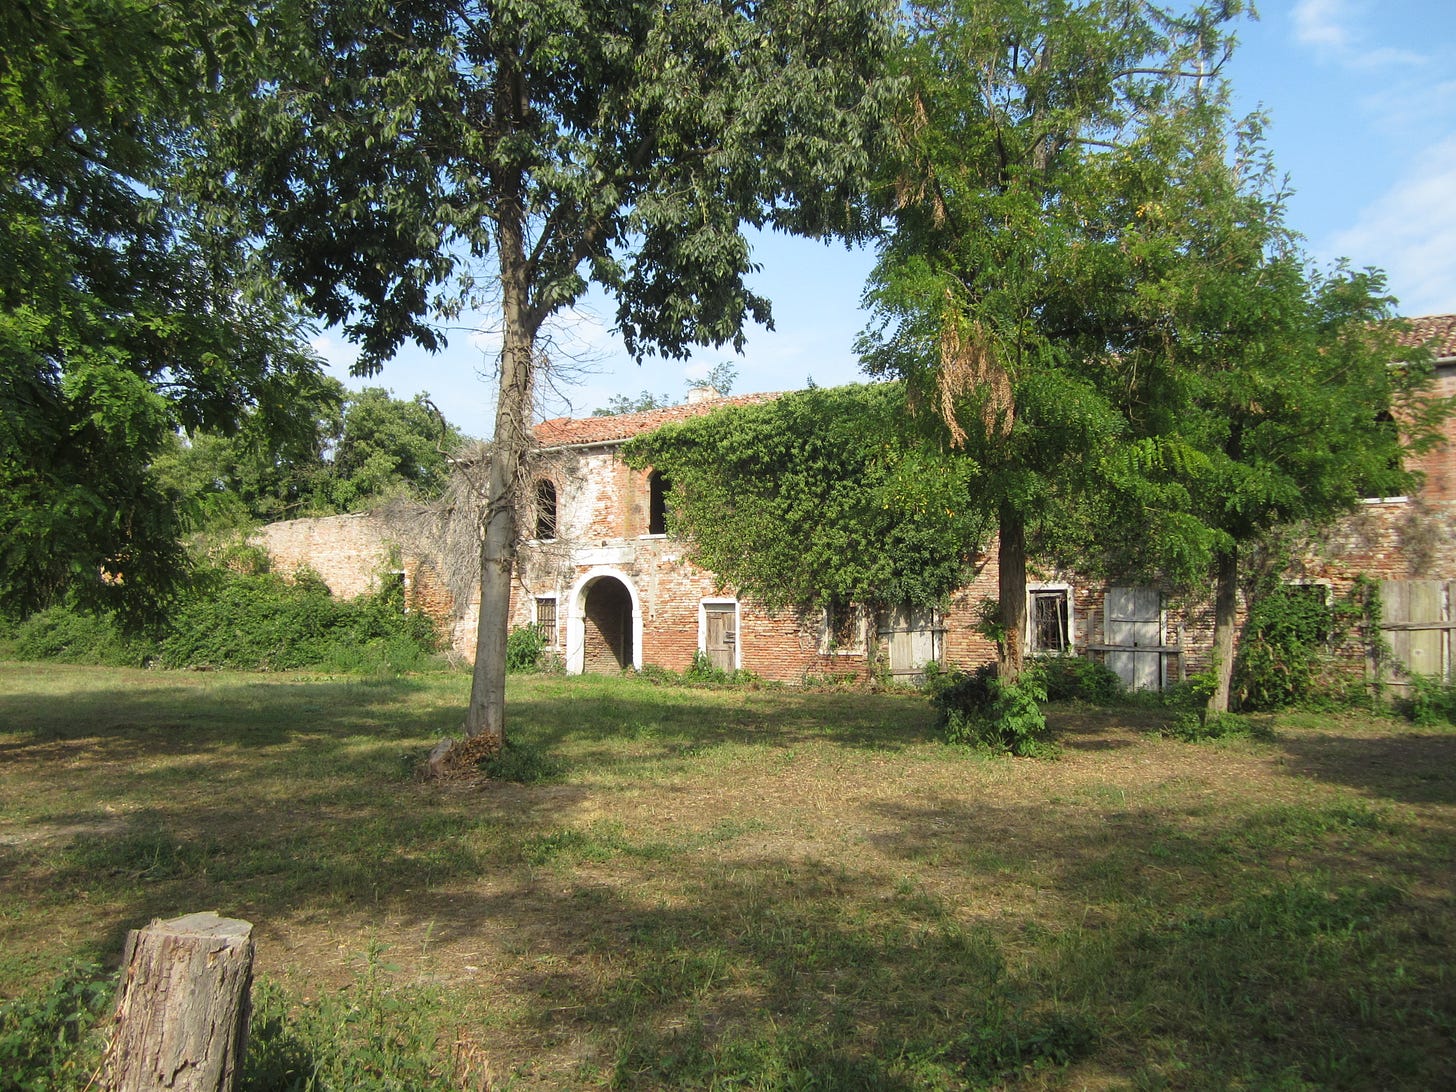 A modern photo of a dilapidated two-storey brick building with an arched doorway. Behind it is a clear sky and in front there is grass and trees casting shadows, making the scene appear tranquil.